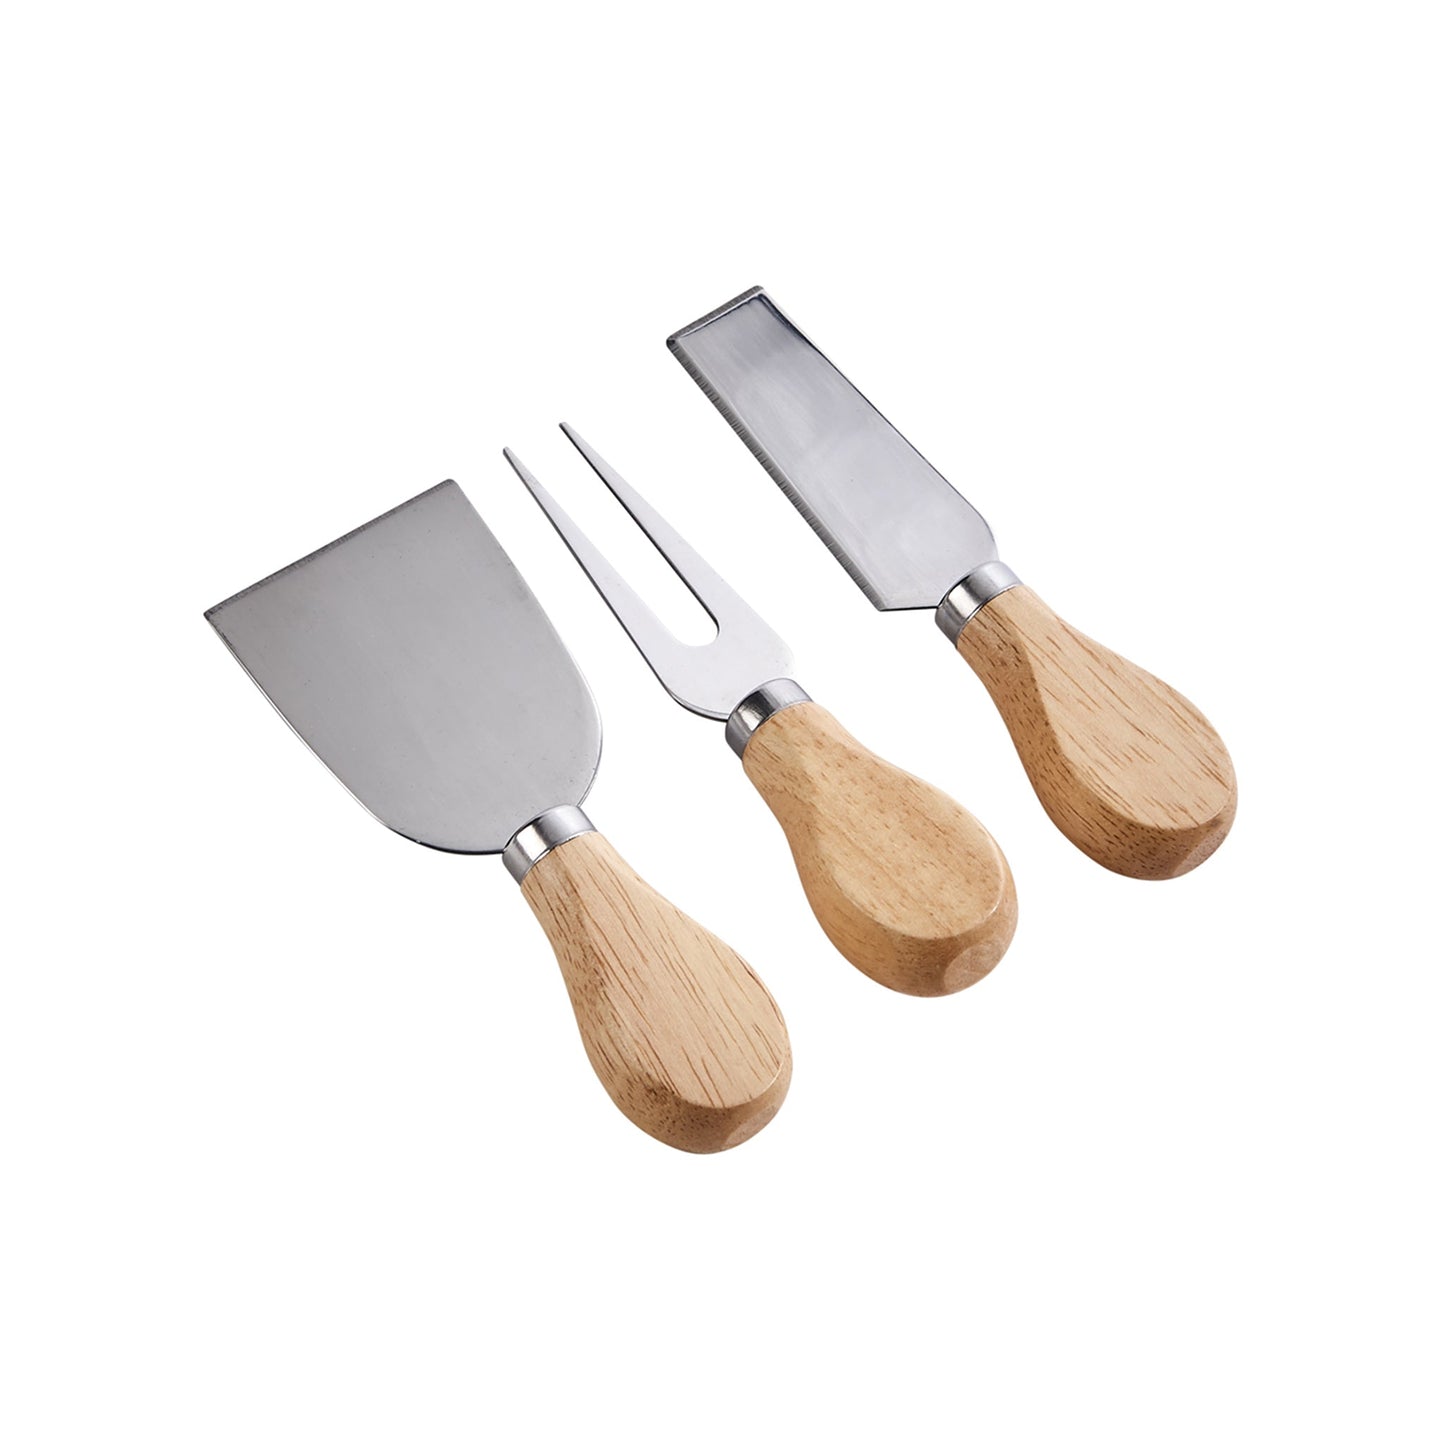 3-Piece Cheese Knife Set - Stainless Steel & Wood by Creative Gifts